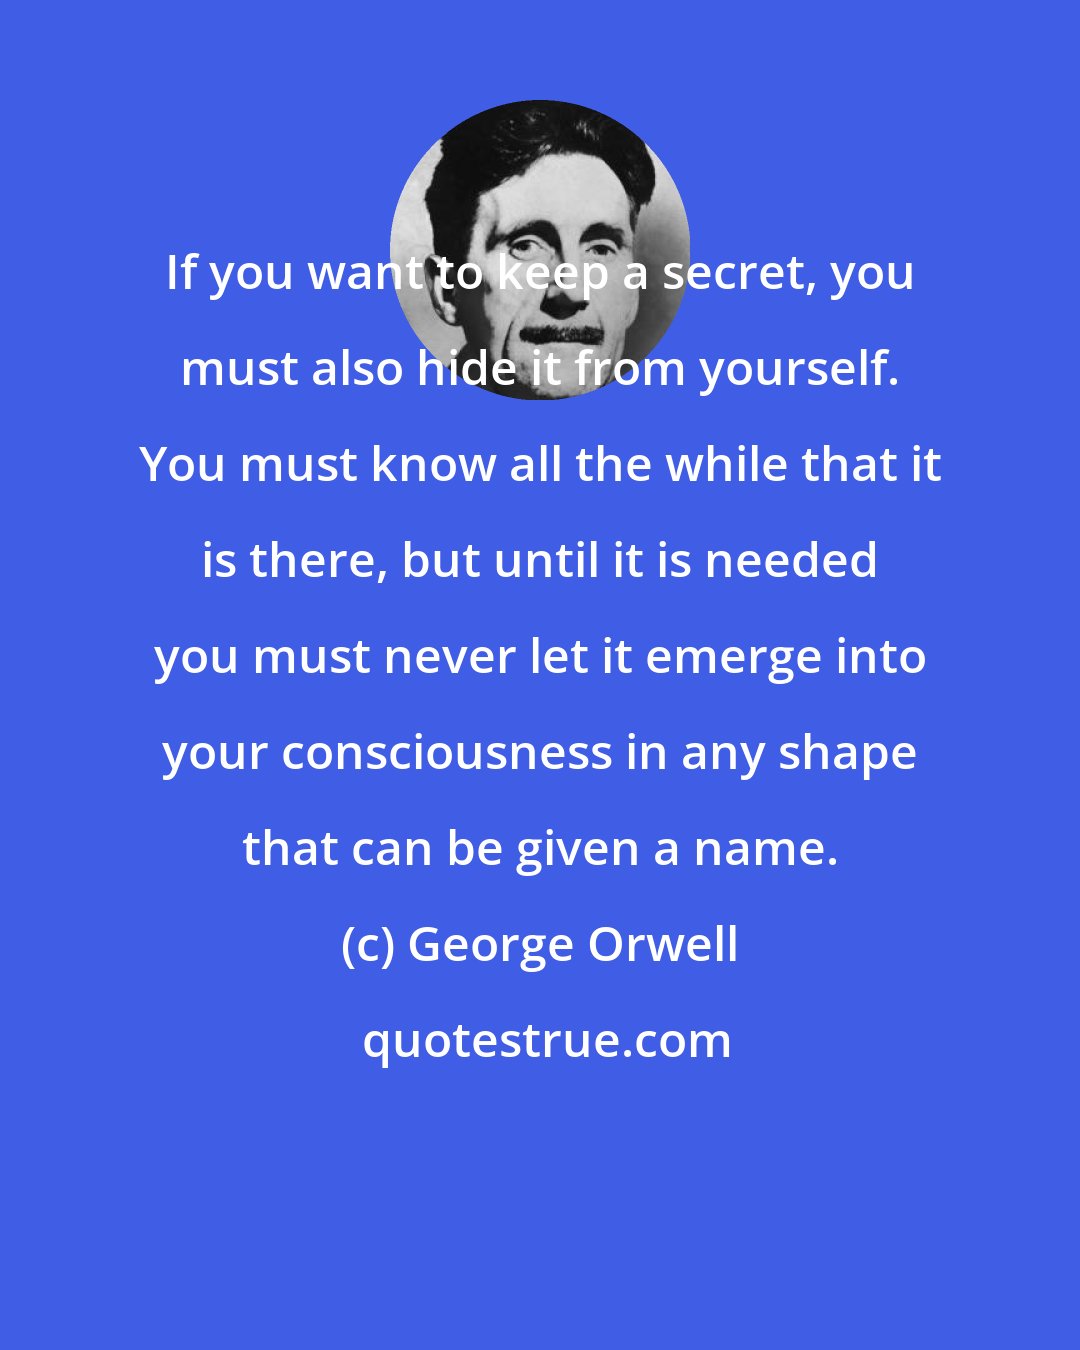 George Orwell: If you want to keep a secret, you must also hide it from yourself. You must know all the while that it is there, but until it is needed you must never let it emerge into your consciousness in any shape that can be given a name.